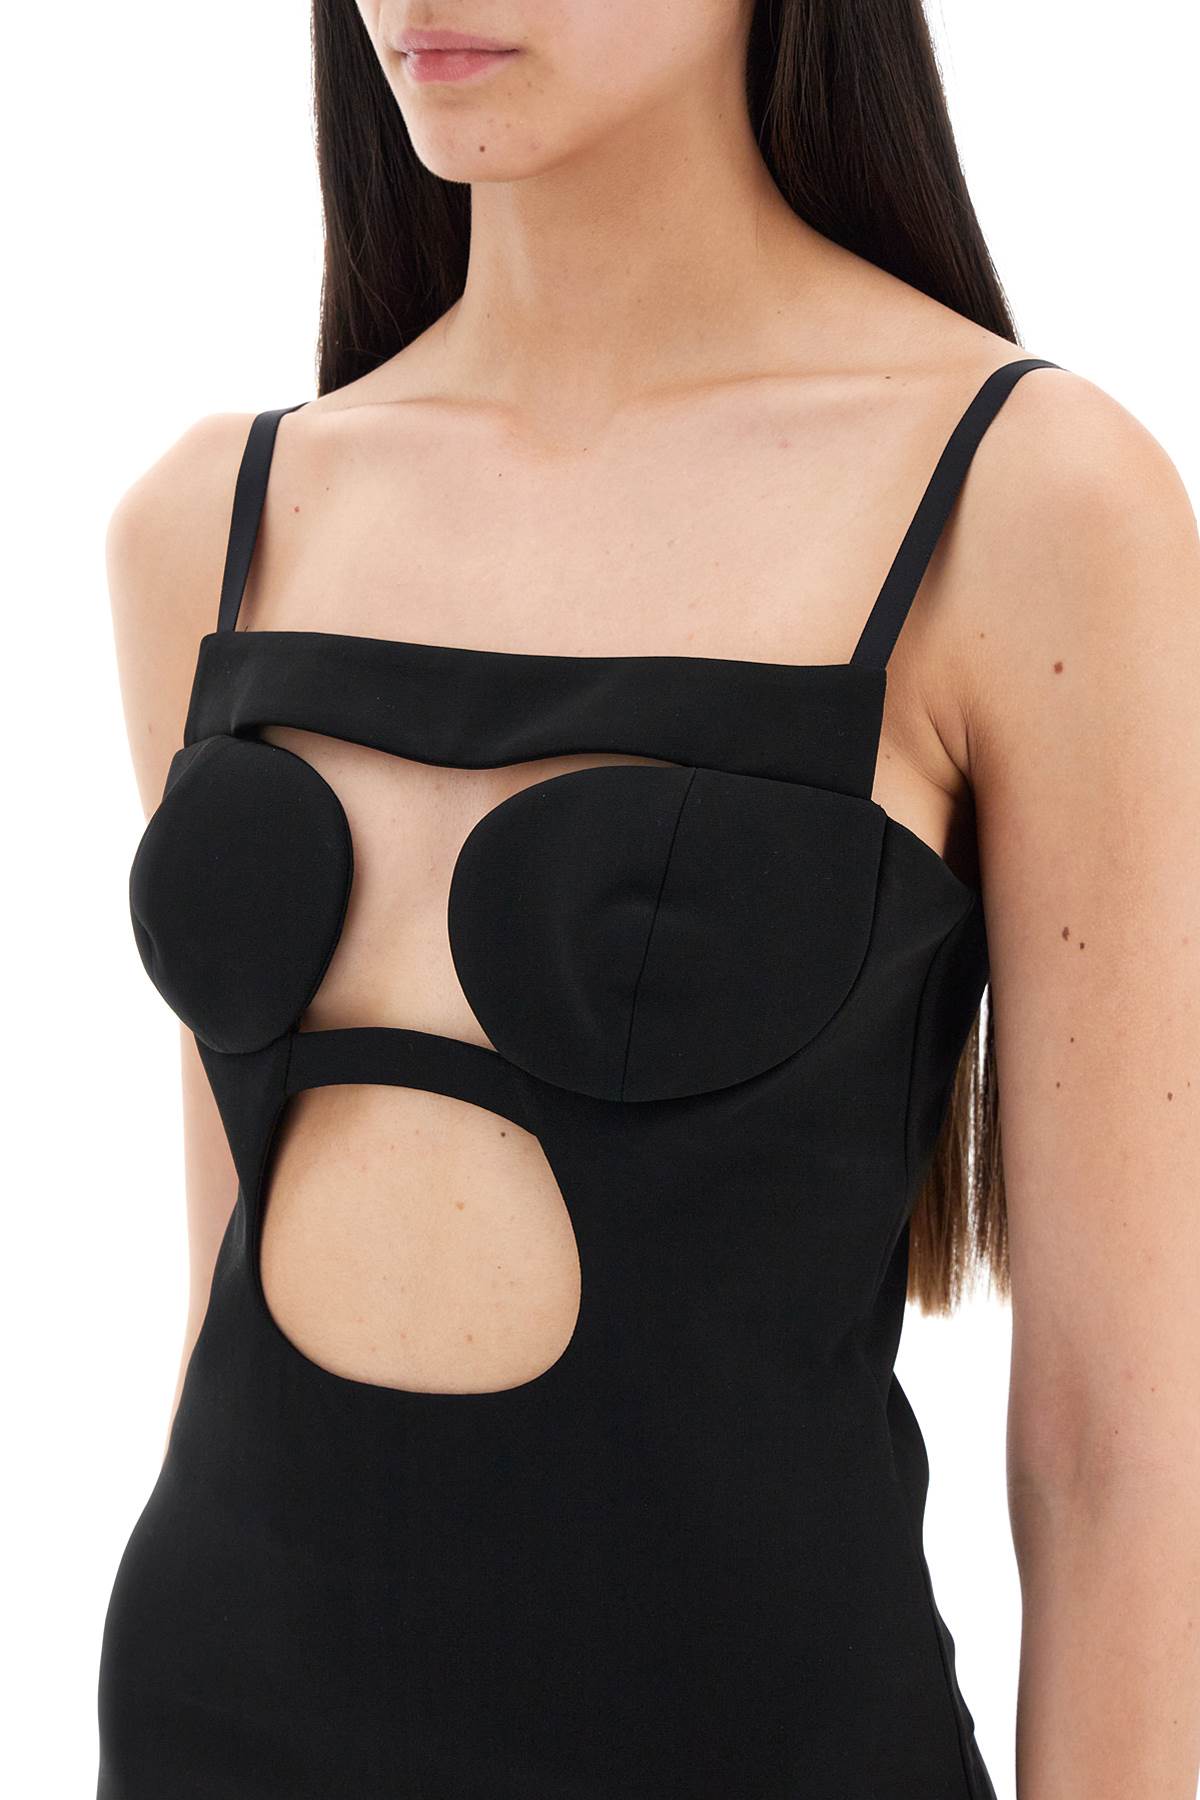 Nensi dojaka cut-out top with padded cup-3